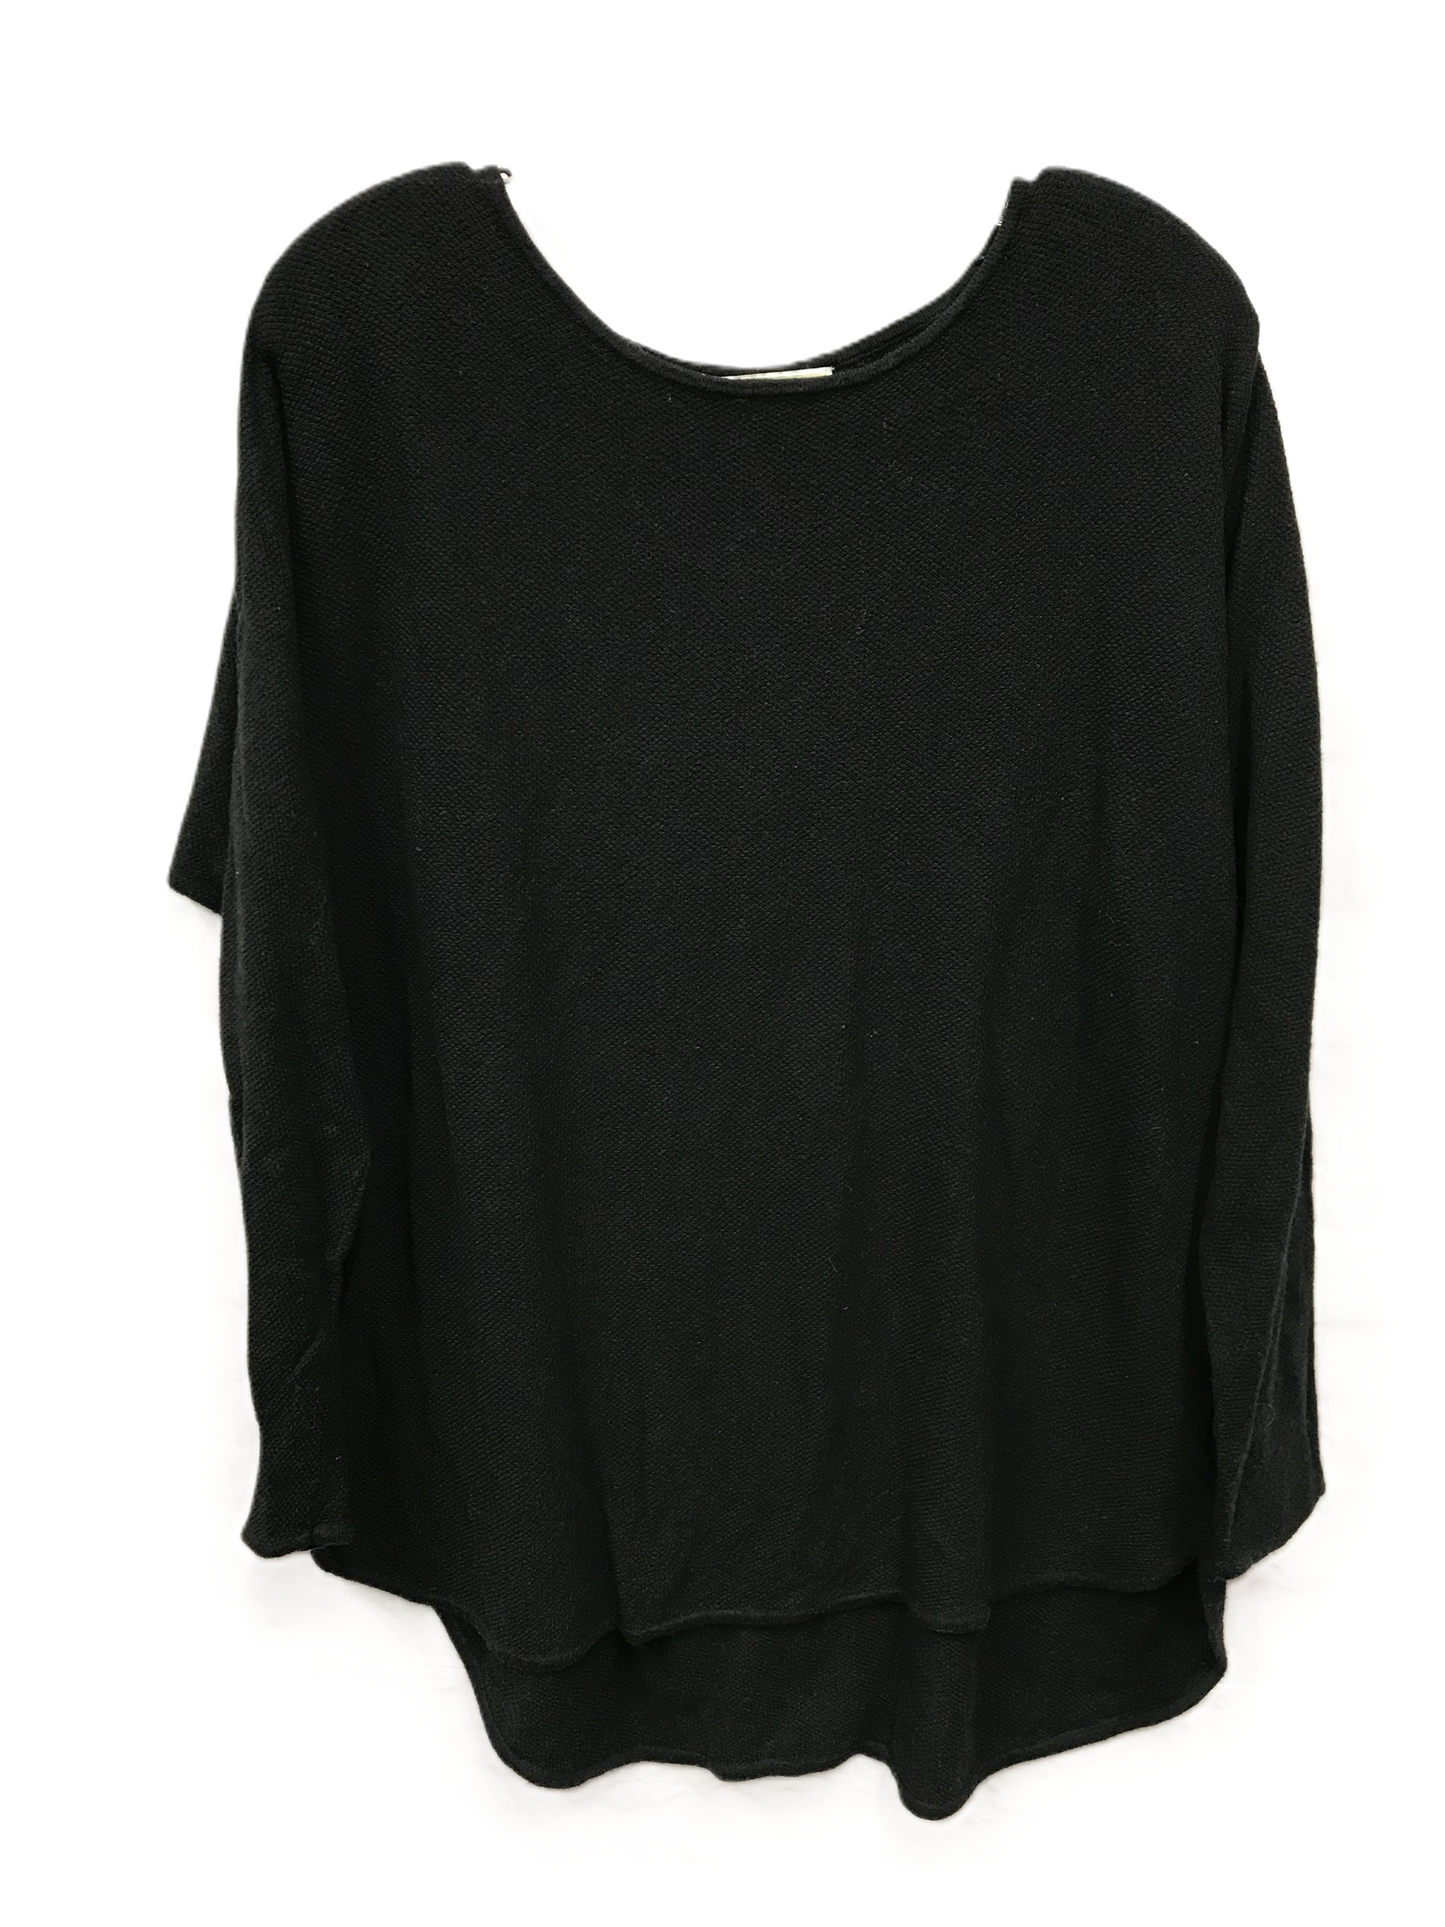 Black Top Long Sleeve By Michael By Michael Kors, Size: Xl